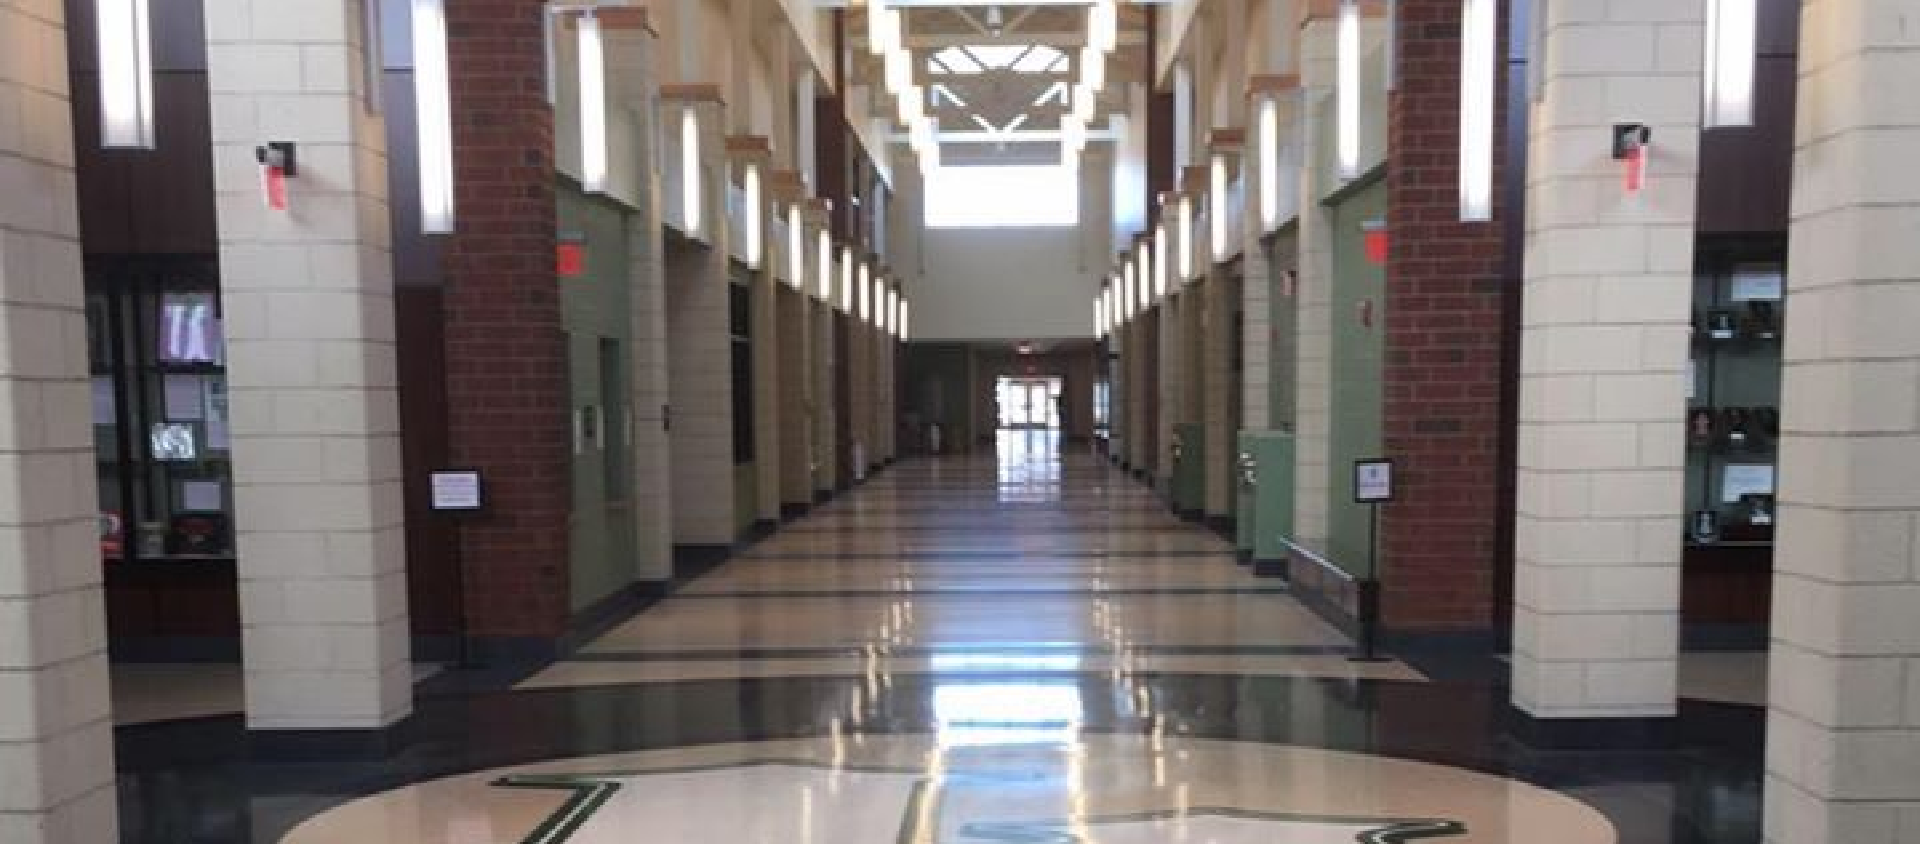 FILE PHOTO: Empty halls at Lewisburg Area High School. The state Department of Health is recommending schools in Union County use remote learning only – for at least the first few weeks of the academic year.